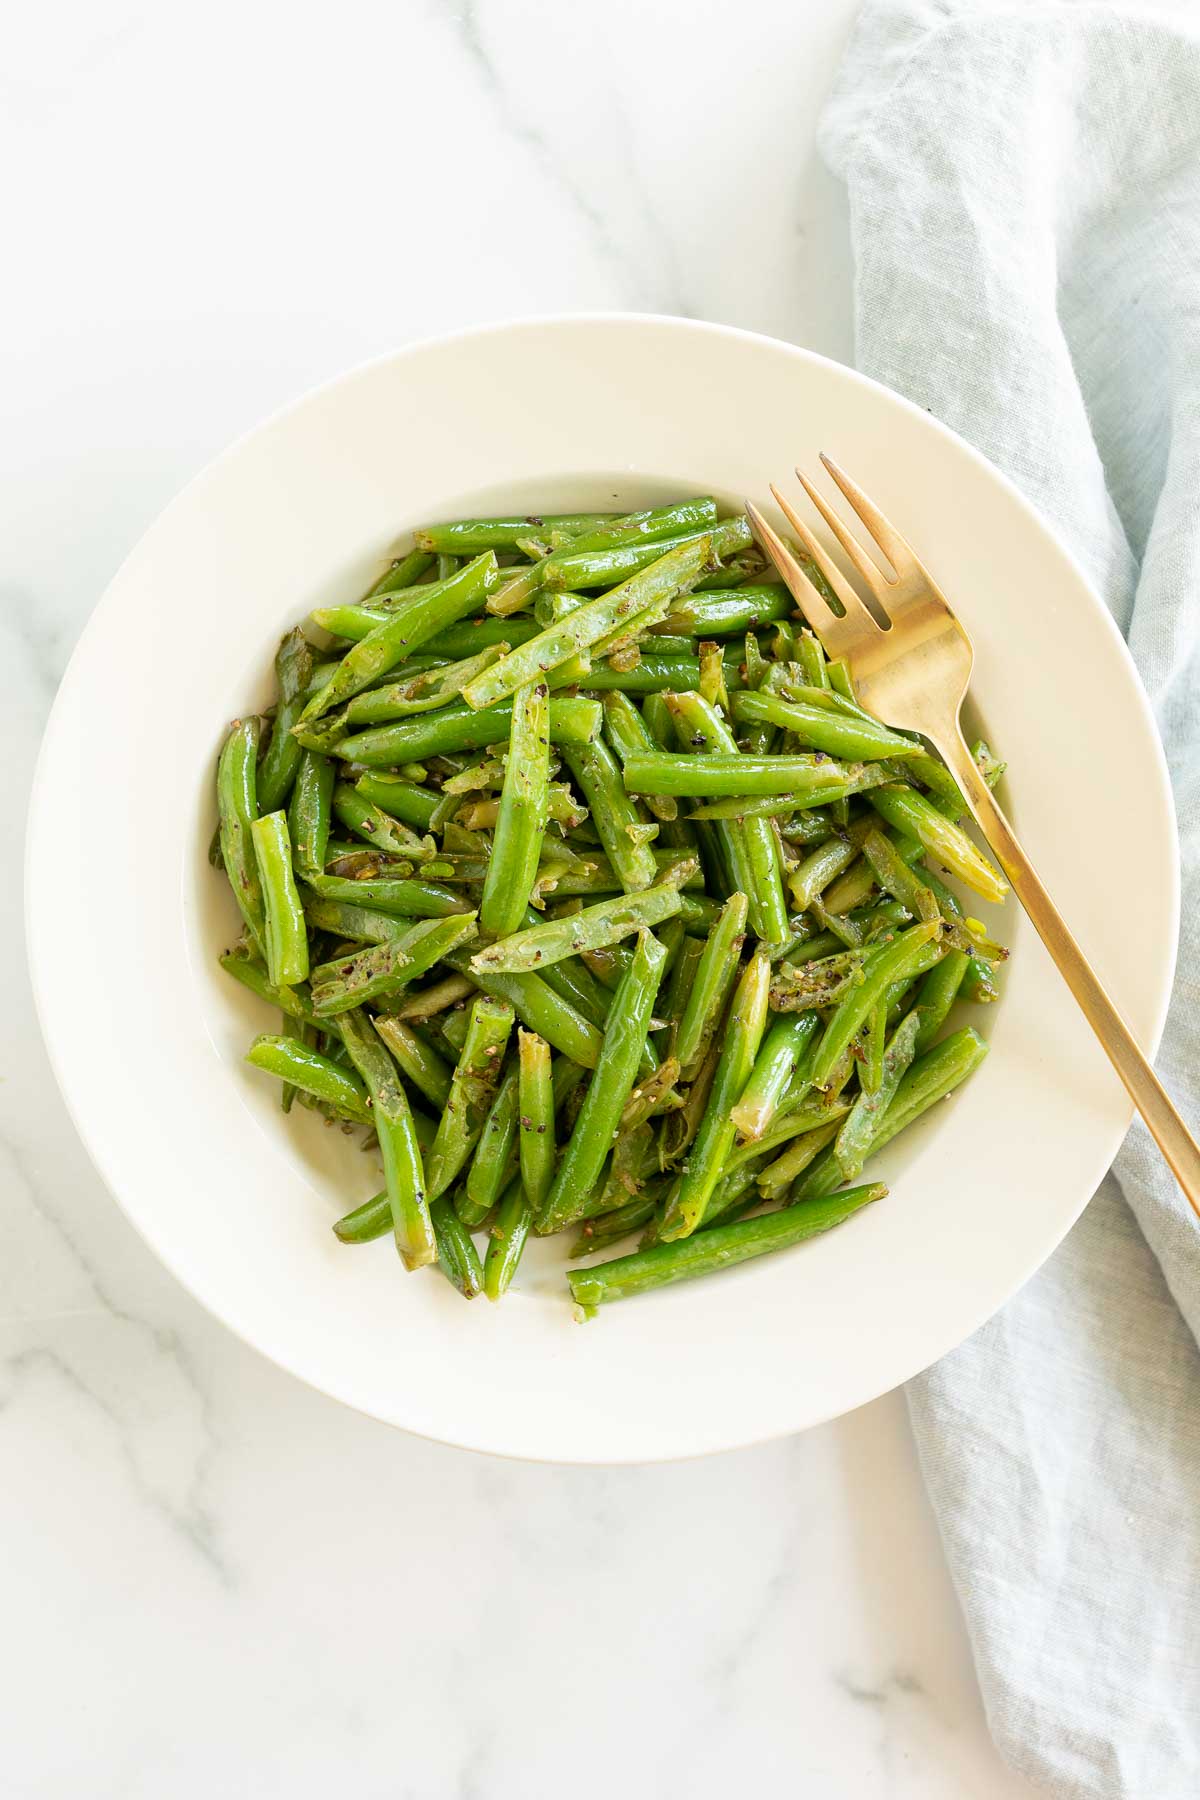 Seasoned green beans served in a white bowl with a gold fork.